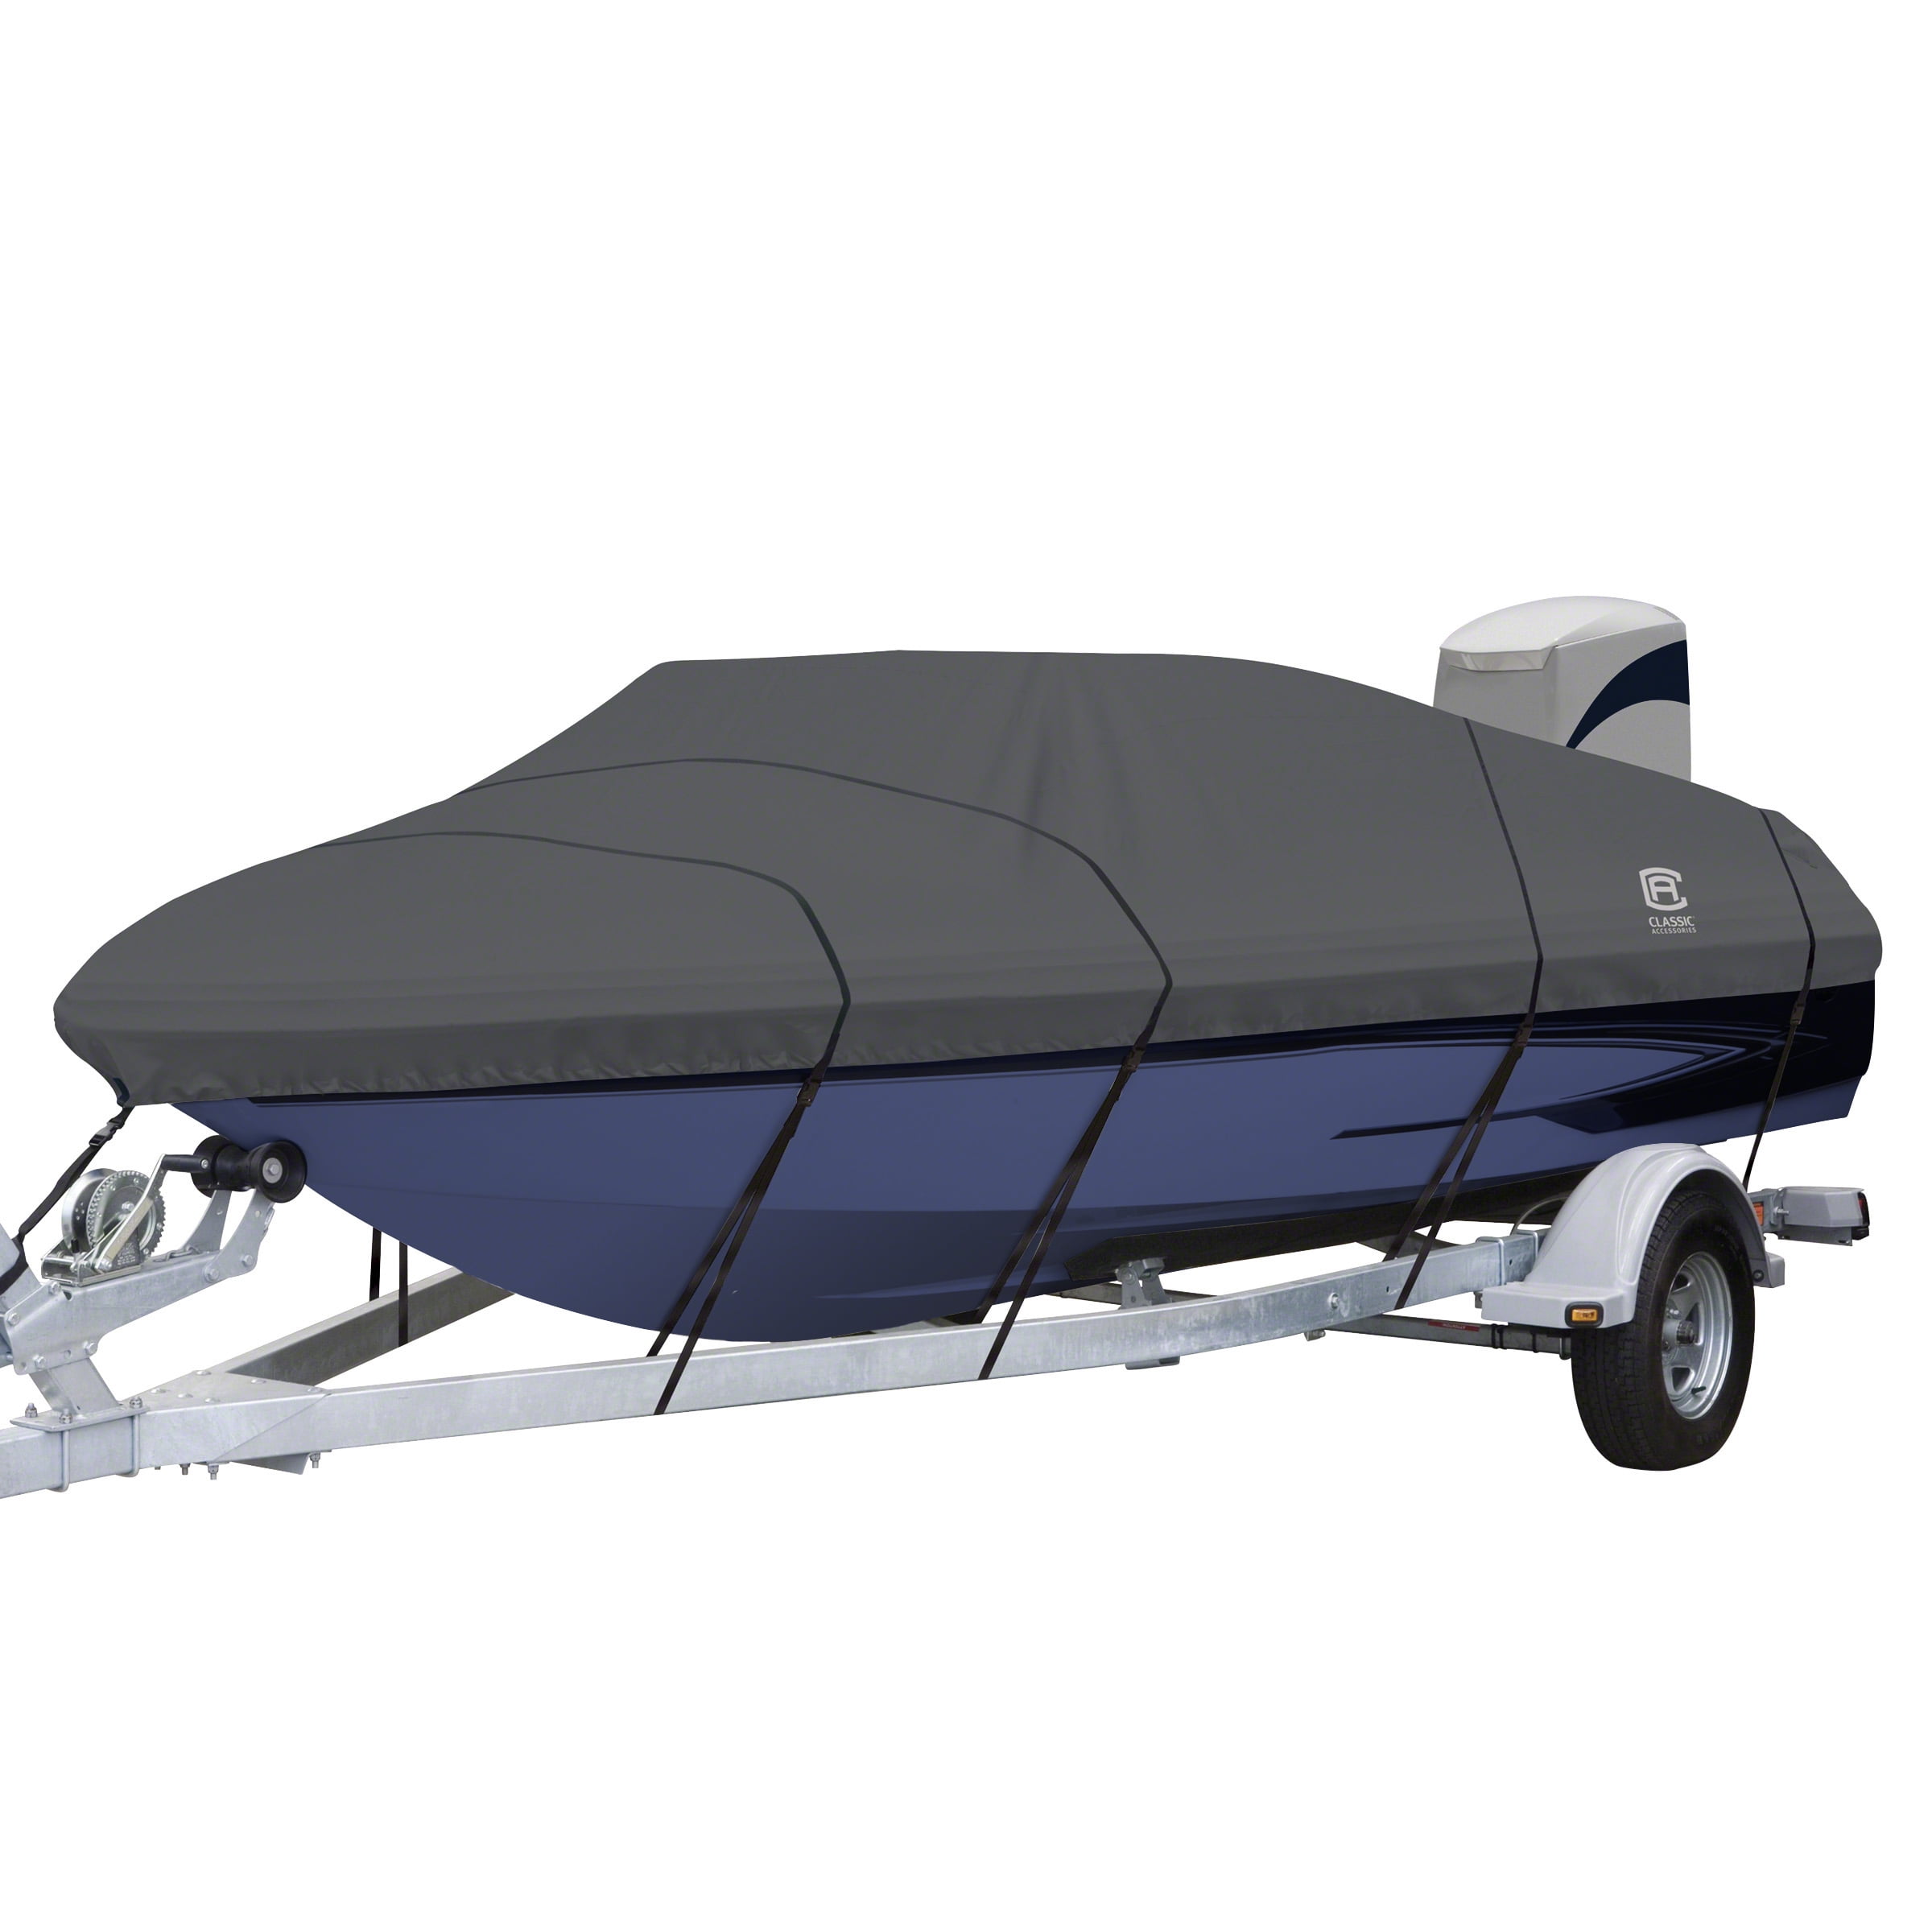 Classic Accessories StormPro HeavyDuty VHull Inboard/Outboard Boat Cover, Fits boats 20 ft 6